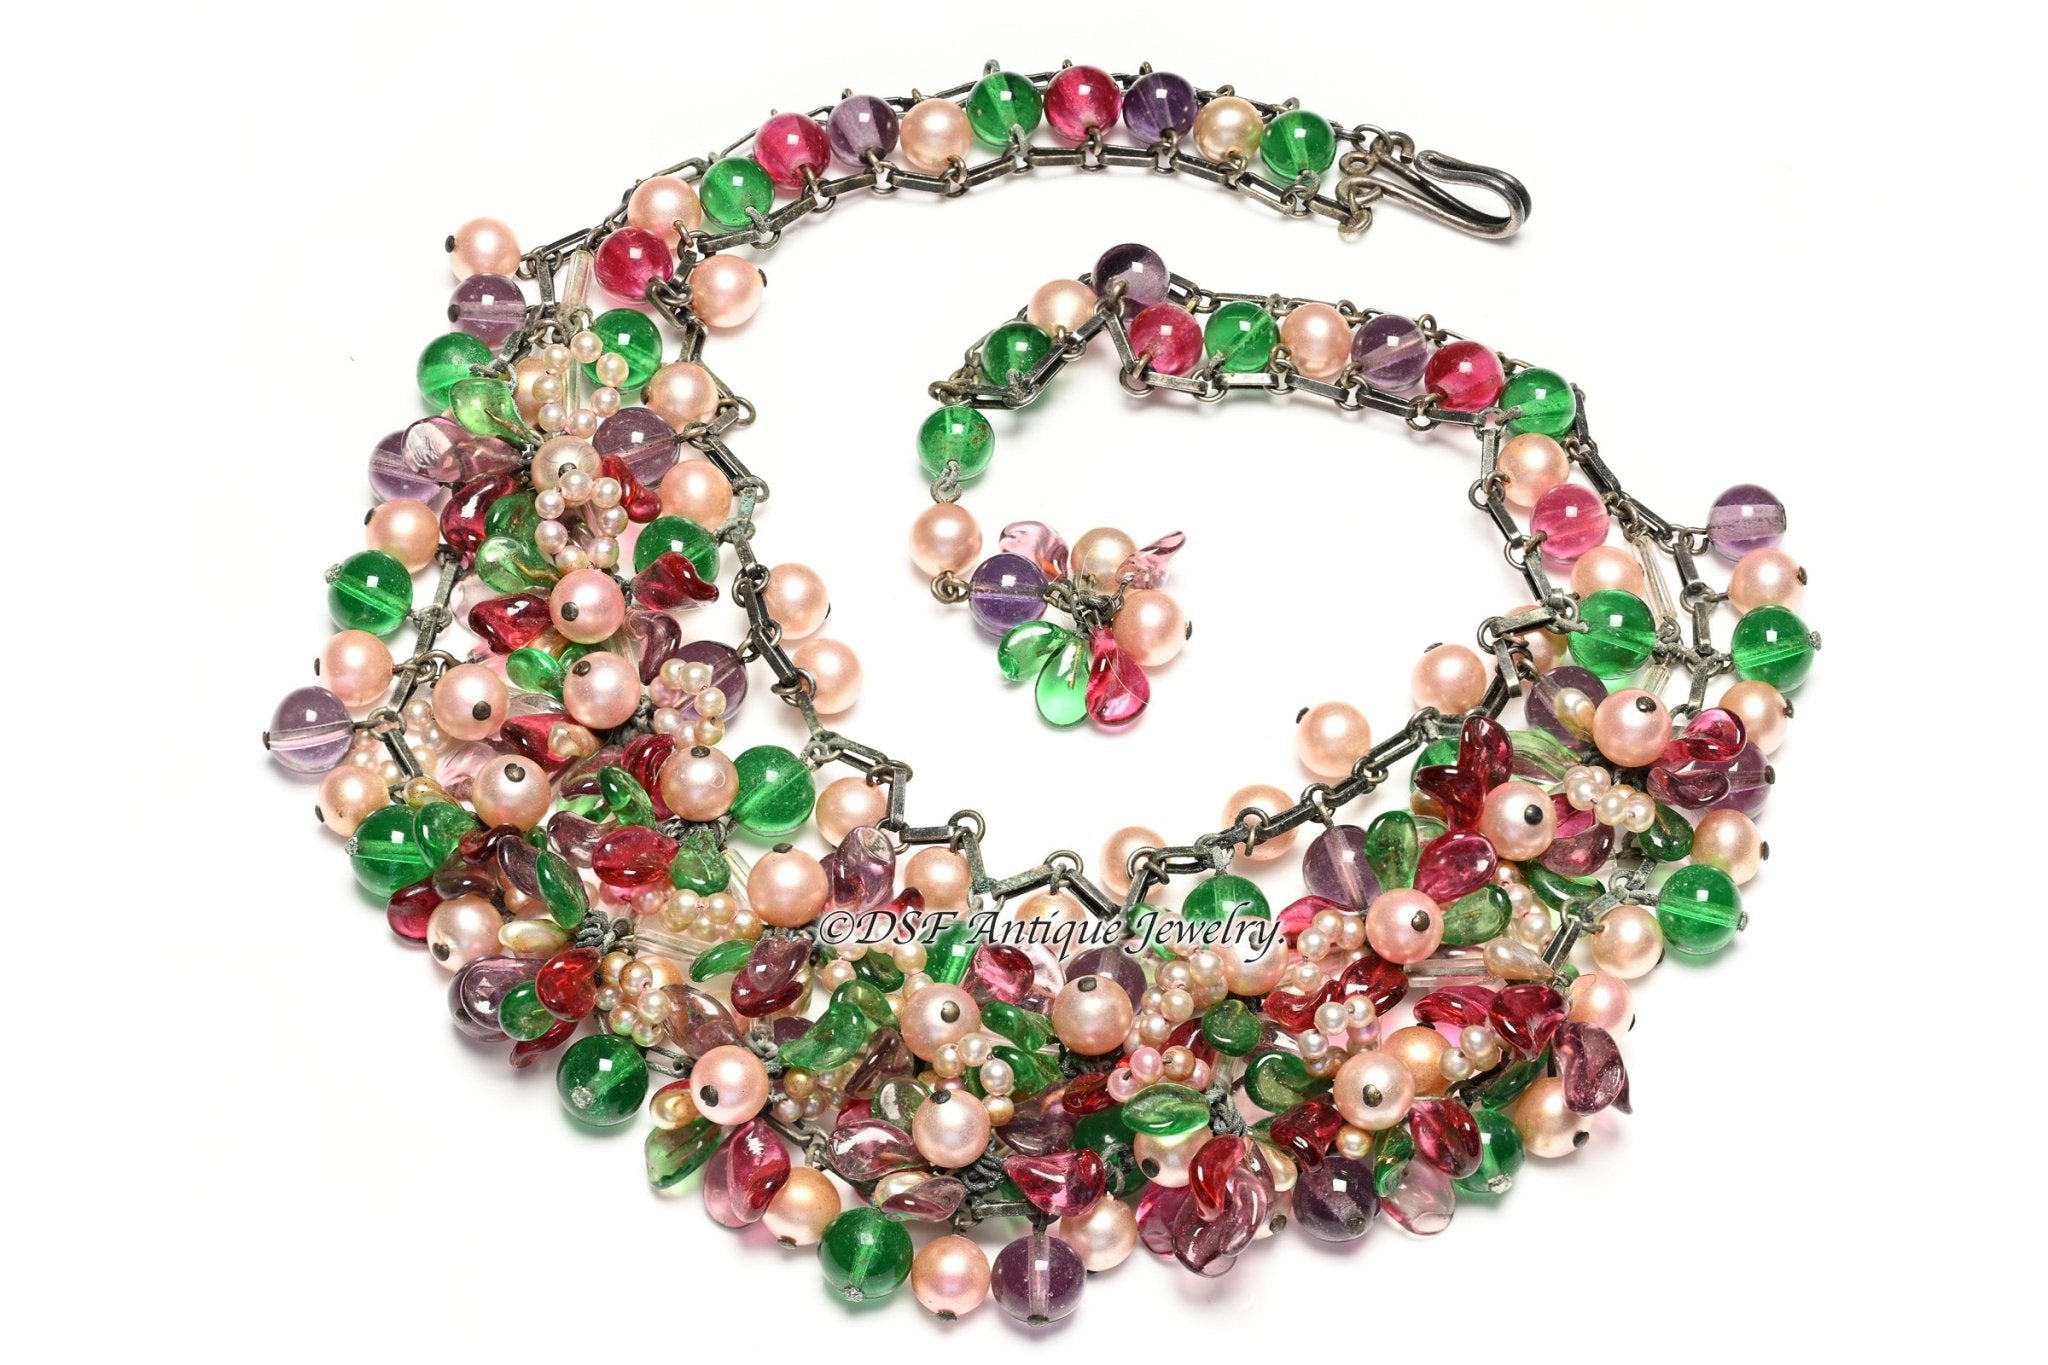 Chanel Paris by Louis Rousselet 1930’s Red Green Purple Glass Pearl Beads Necklace - DSF Antique Jewelry